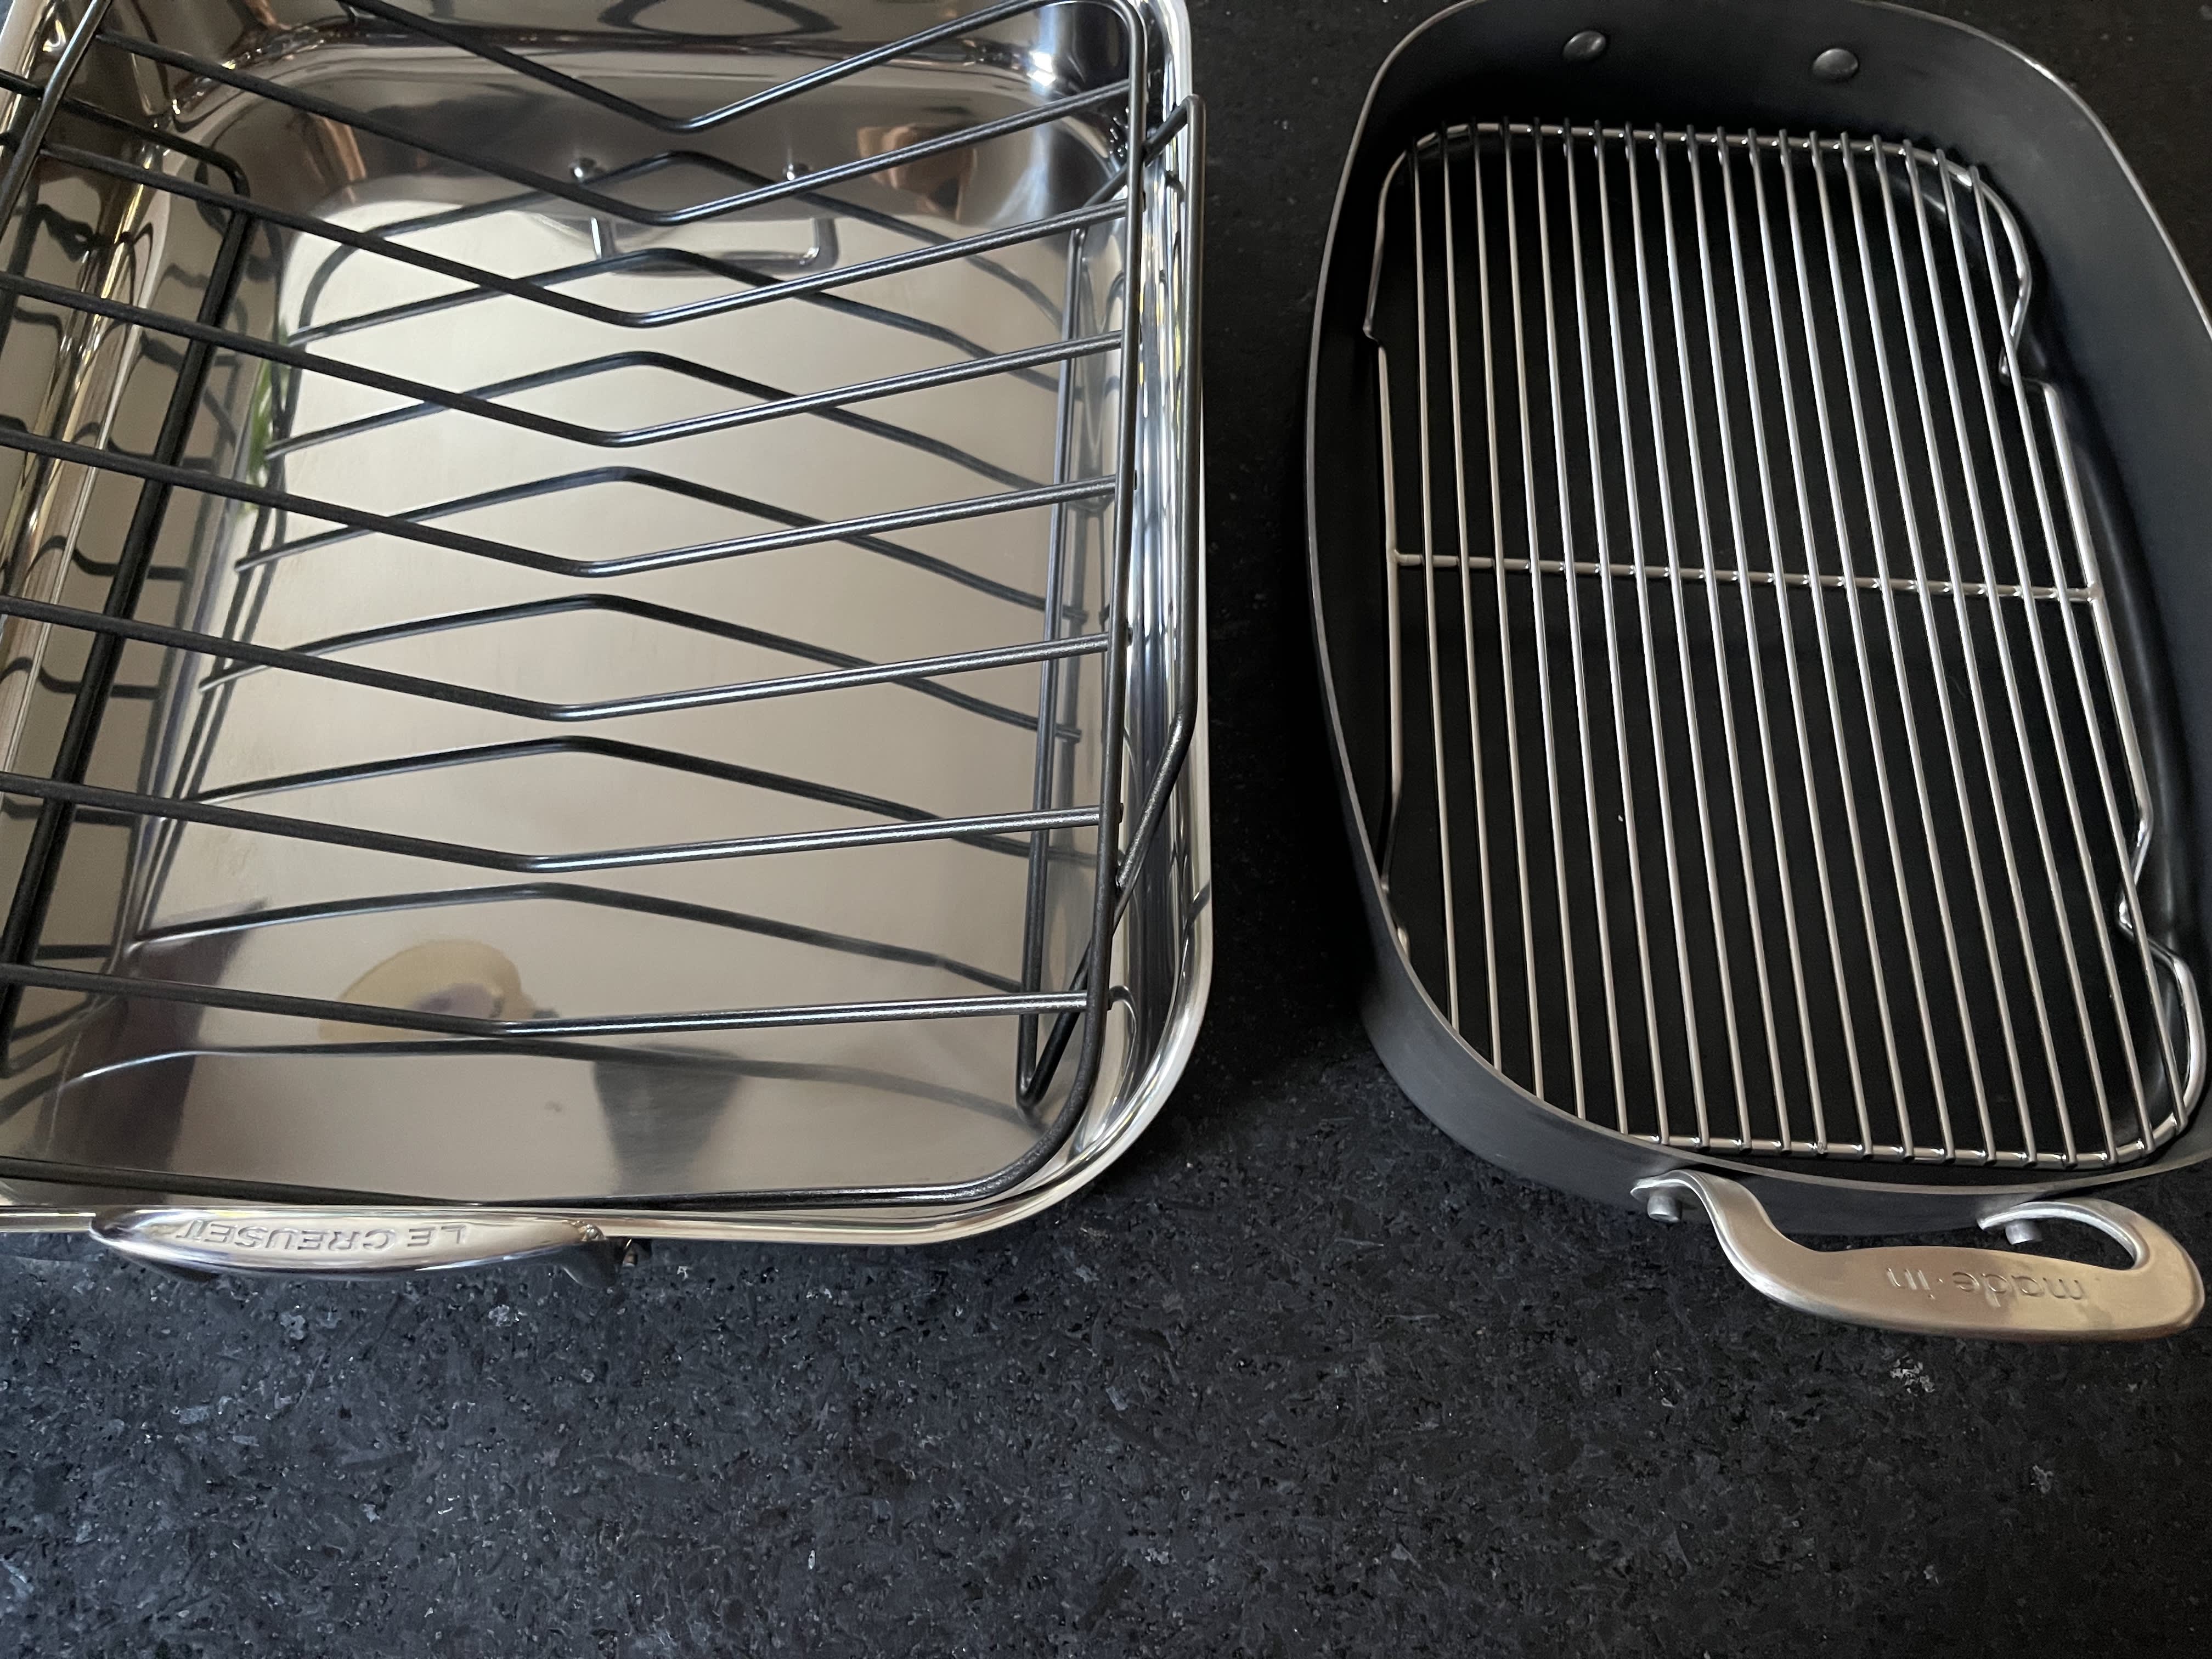 The Best Roasting Pans to Buy in 2023